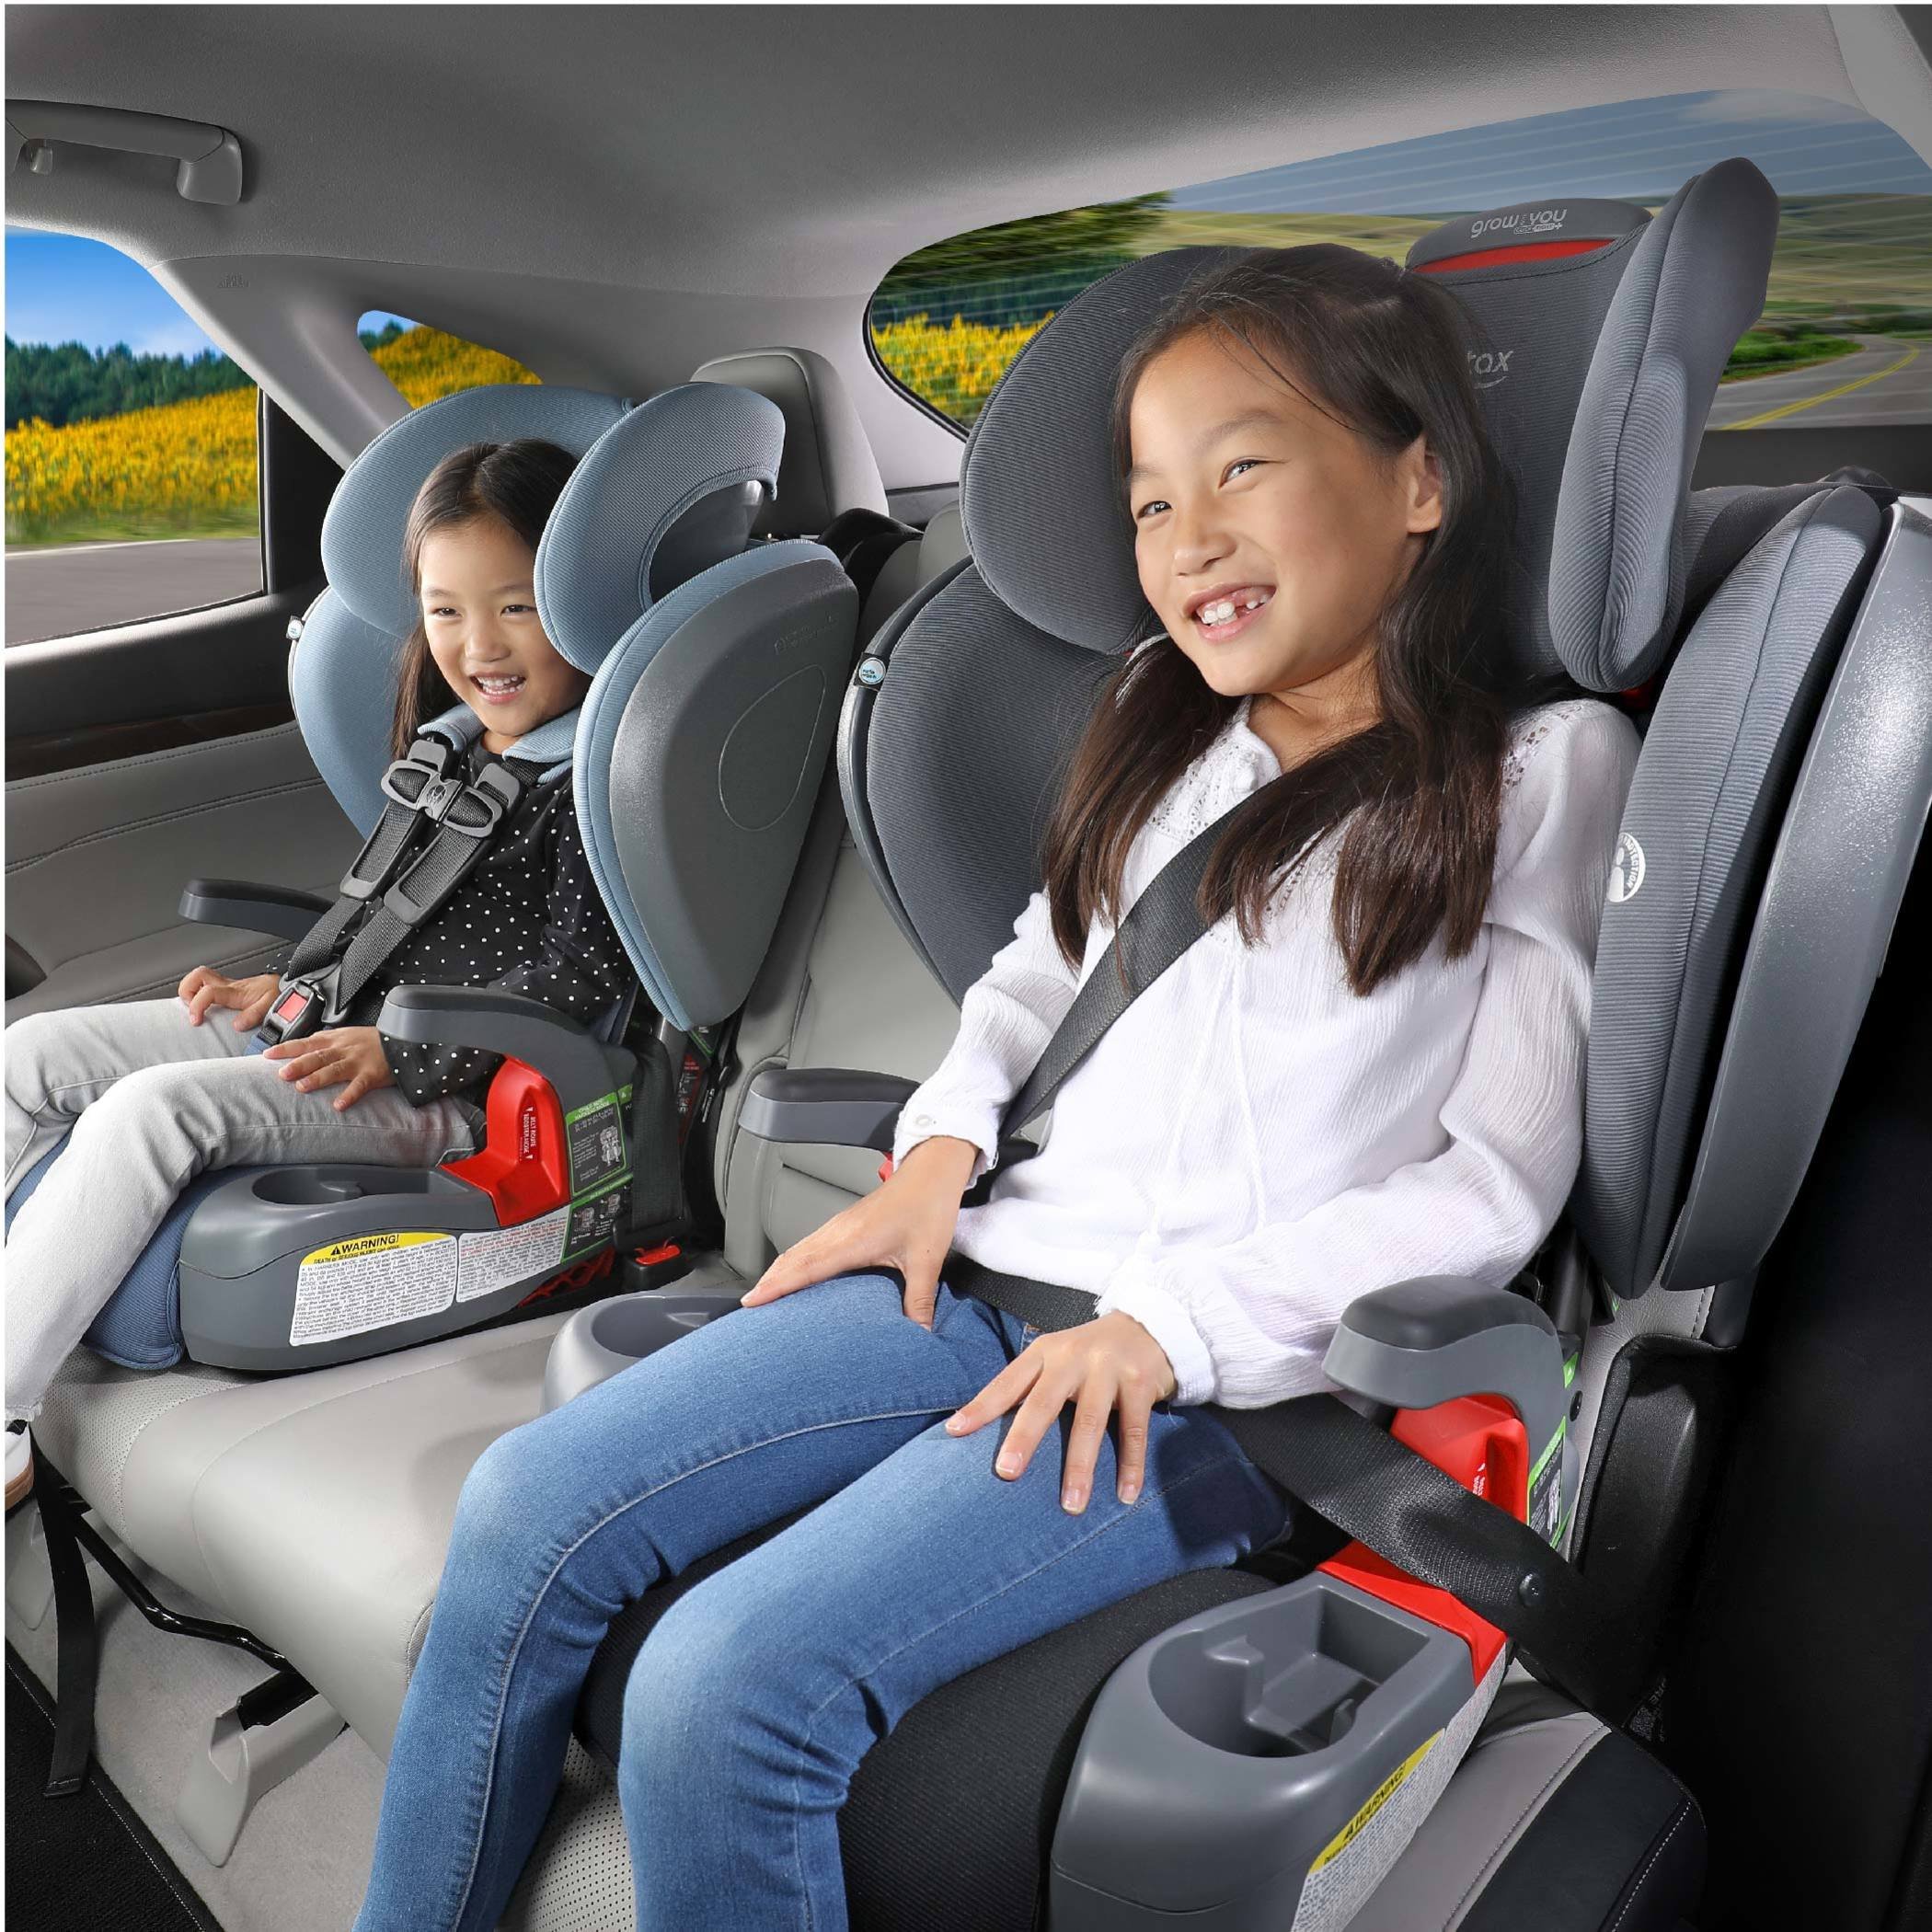 Children riding in Grow With You ClickTight Harness-2-Booster Car Seats (Copy)